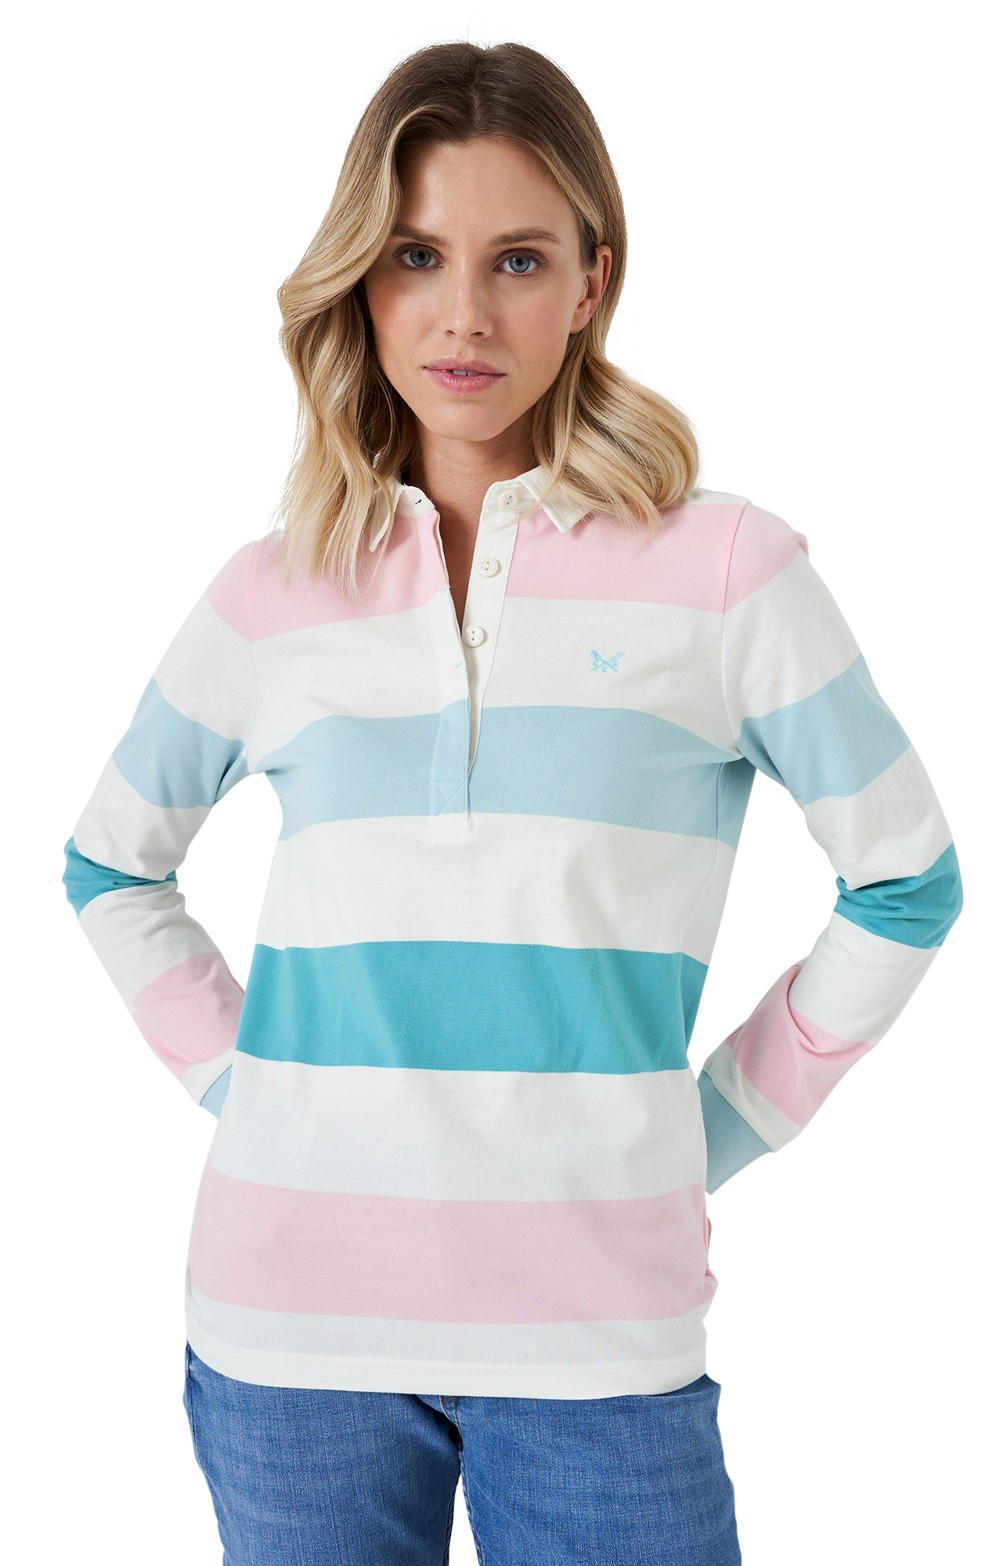 Ladies Classic Rugby Shirt, Pink/Blue